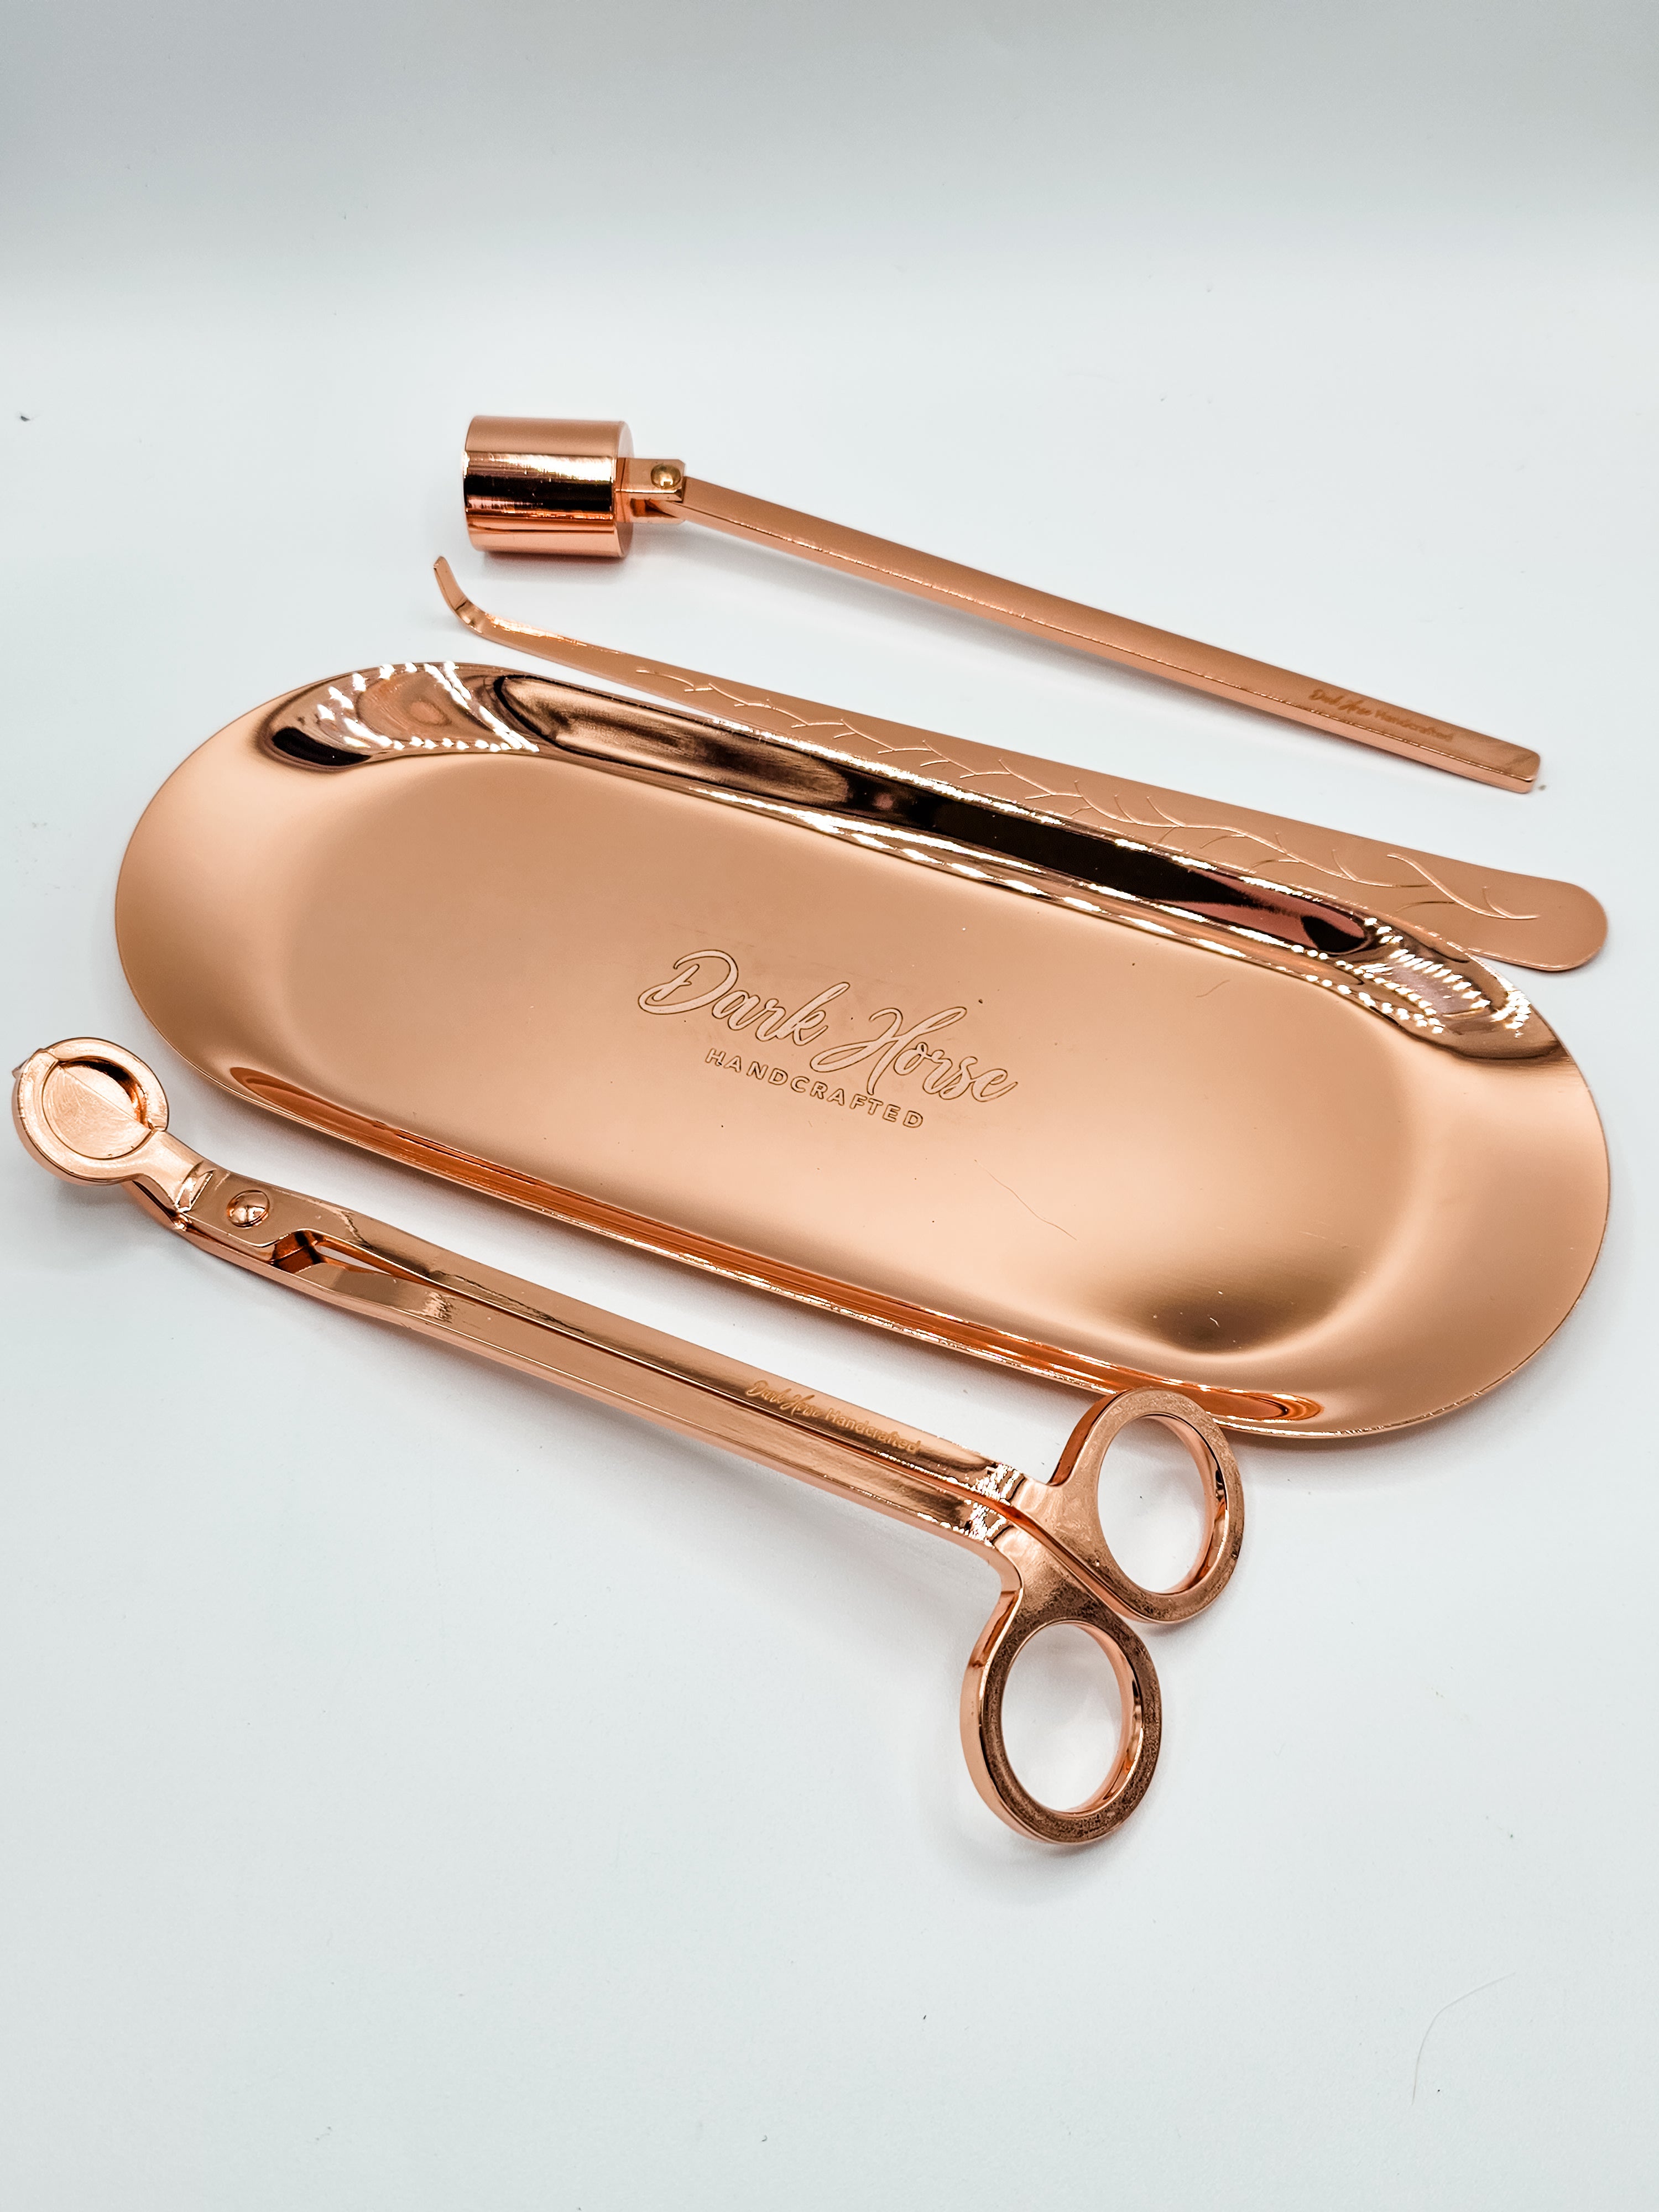 Rose gold candle accessory kit which includes tray, snuffer, wick dipper & wick trimmer.